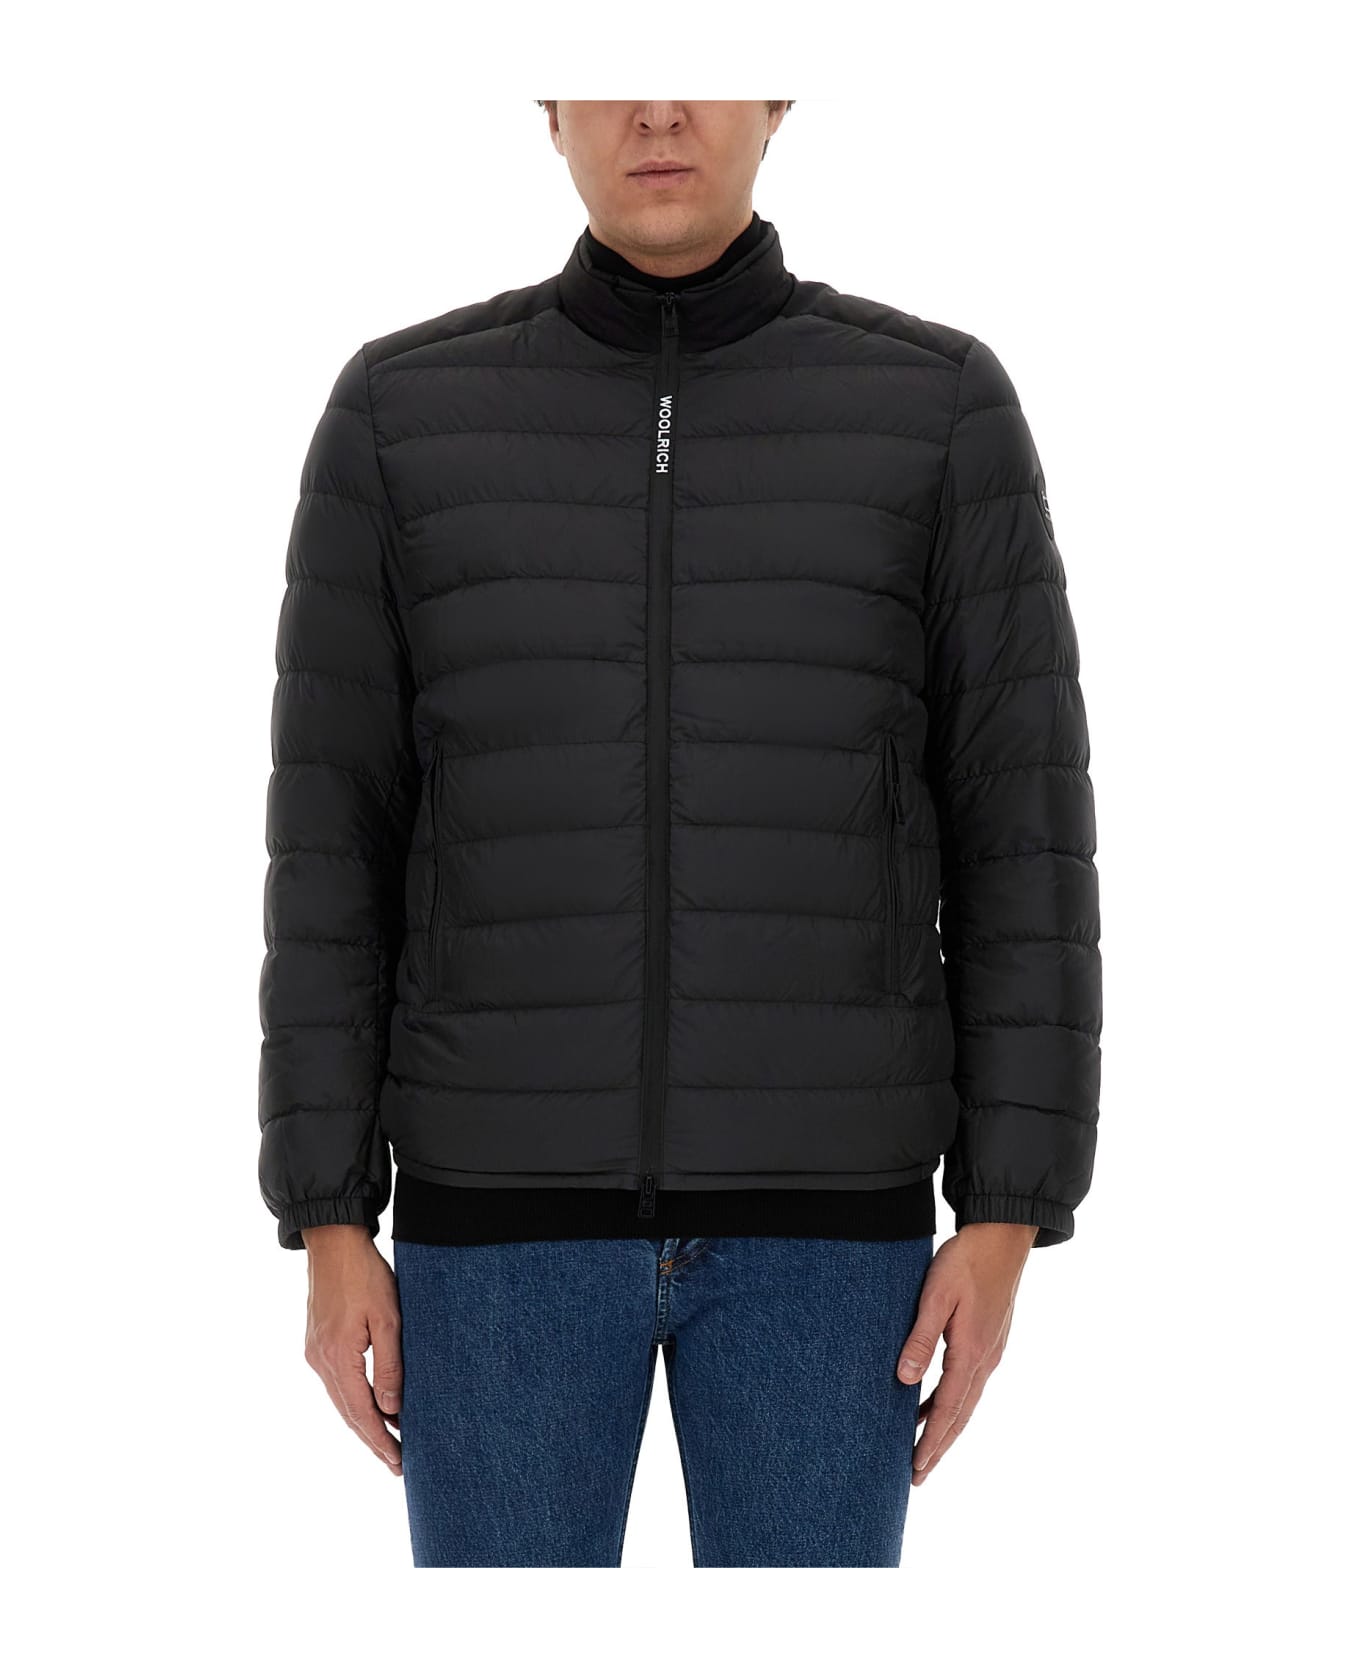 Woolrich Jacket With Logo - NERO